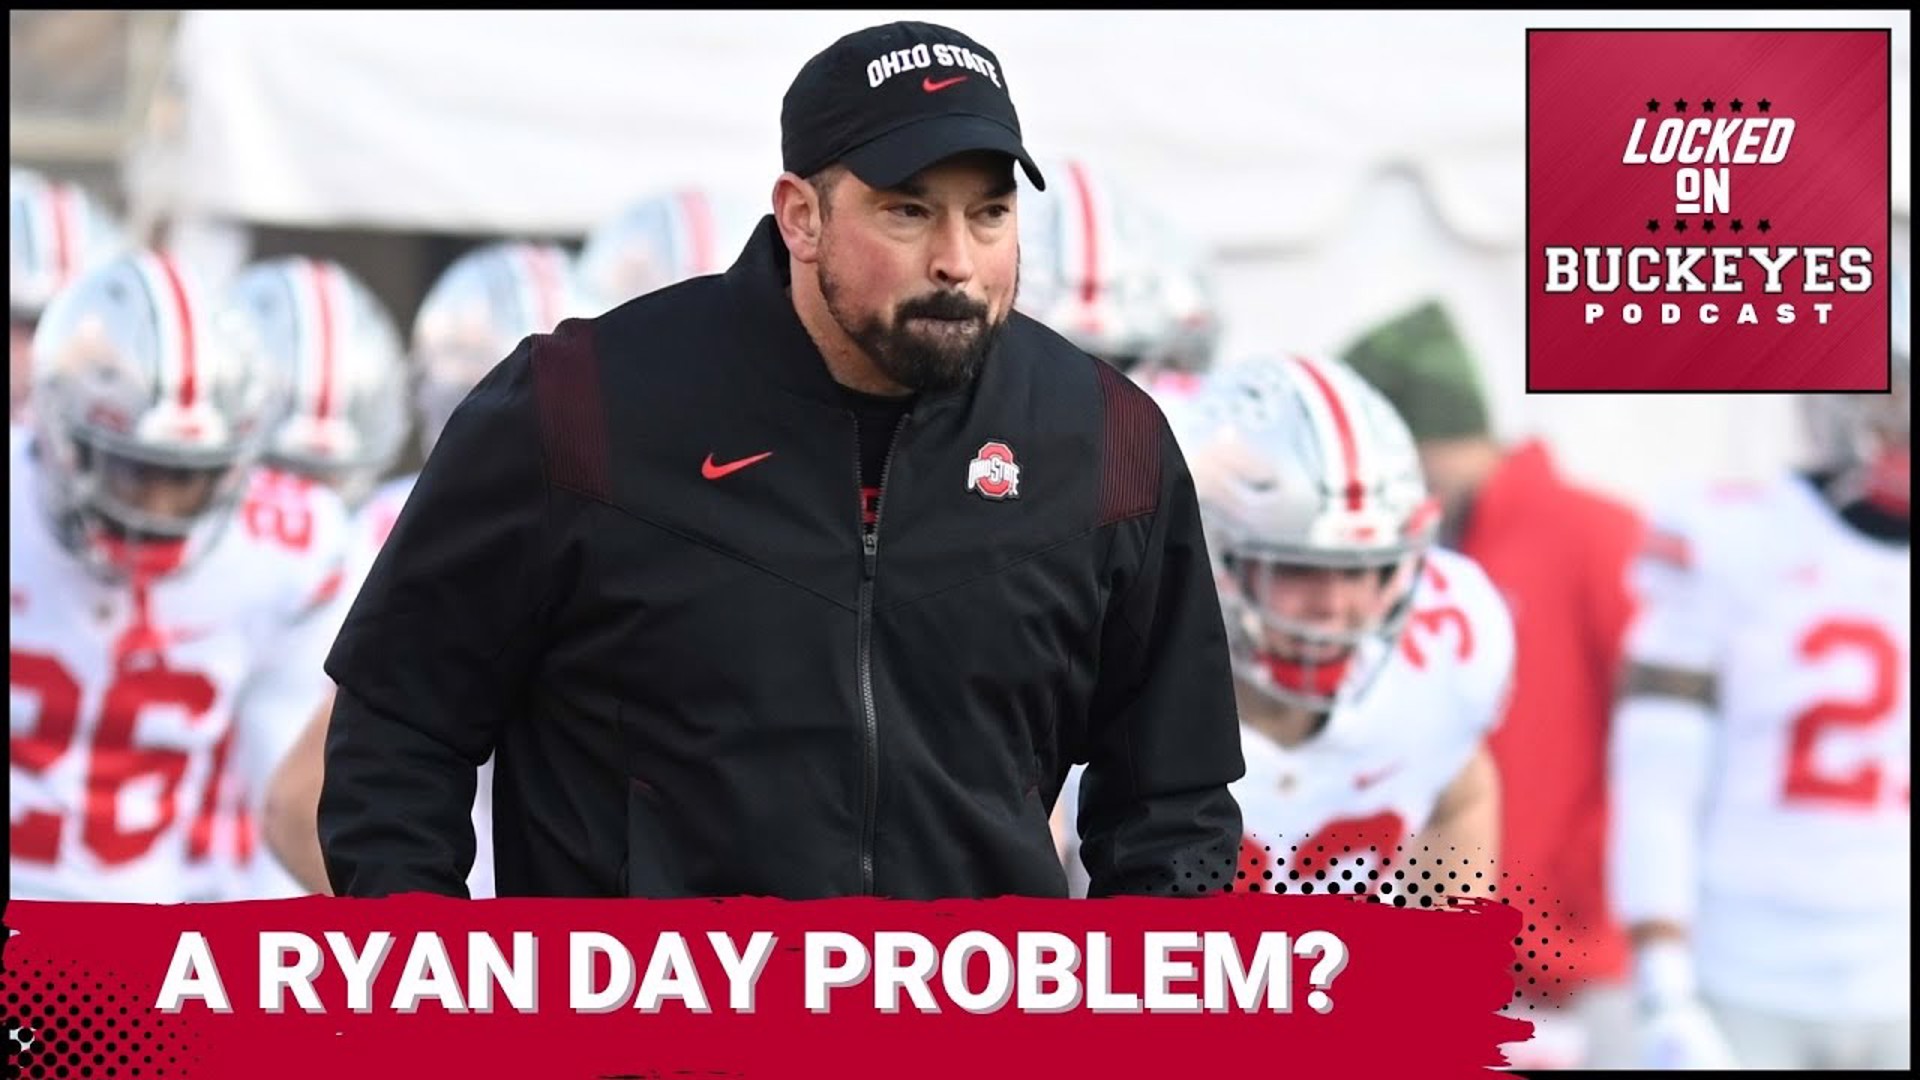 It's clear that coach Ryan Day knows how to lead an elite football program. We talk the latest headlines surrounding Day in this edition of the Locked On Buckeyes